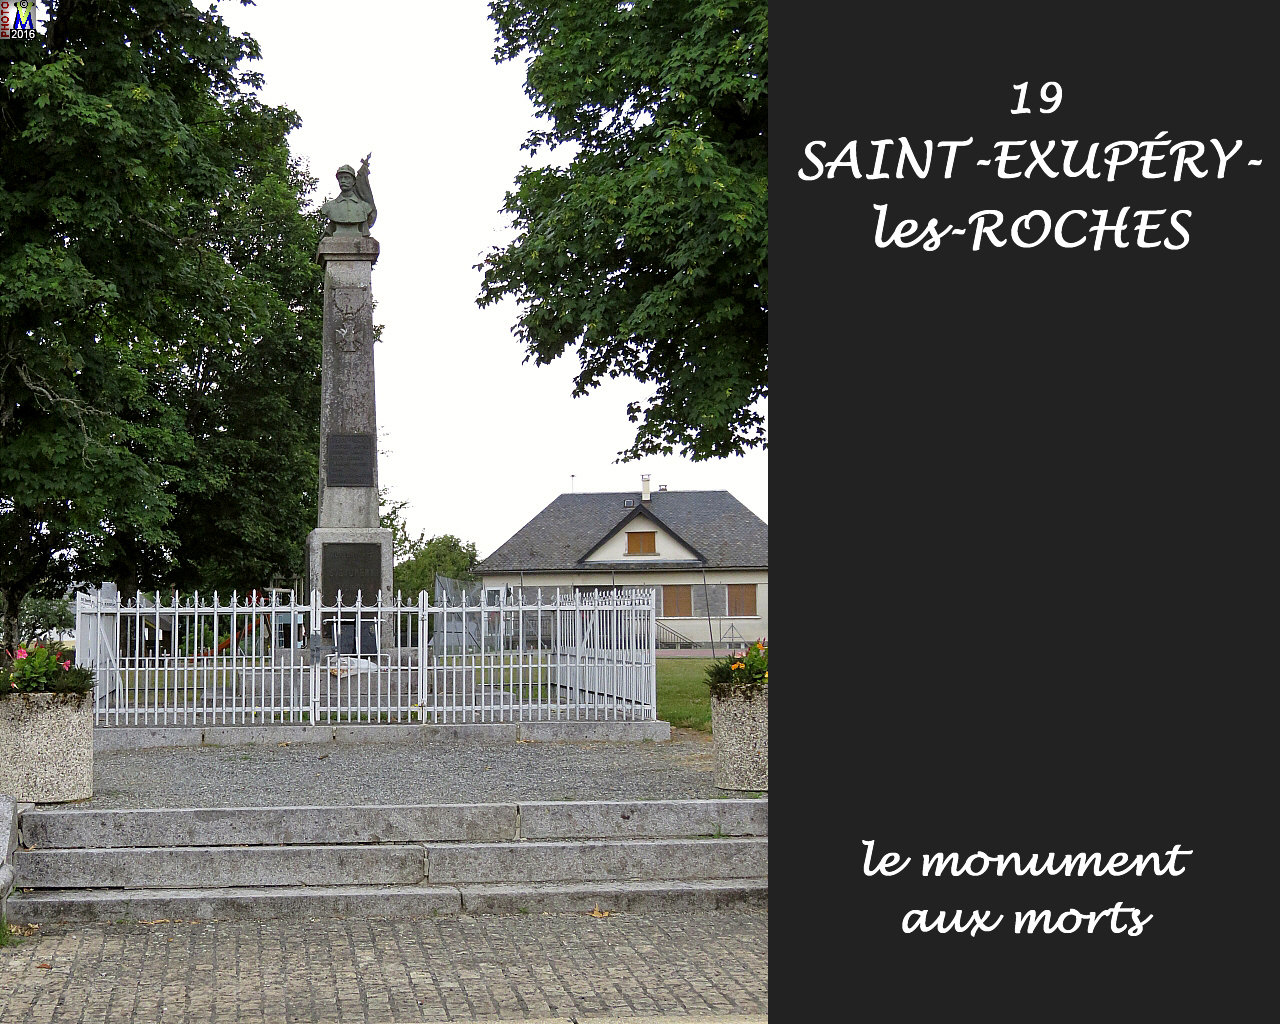 19ST-EXUPERY-ROCHES_morts_100.jpg